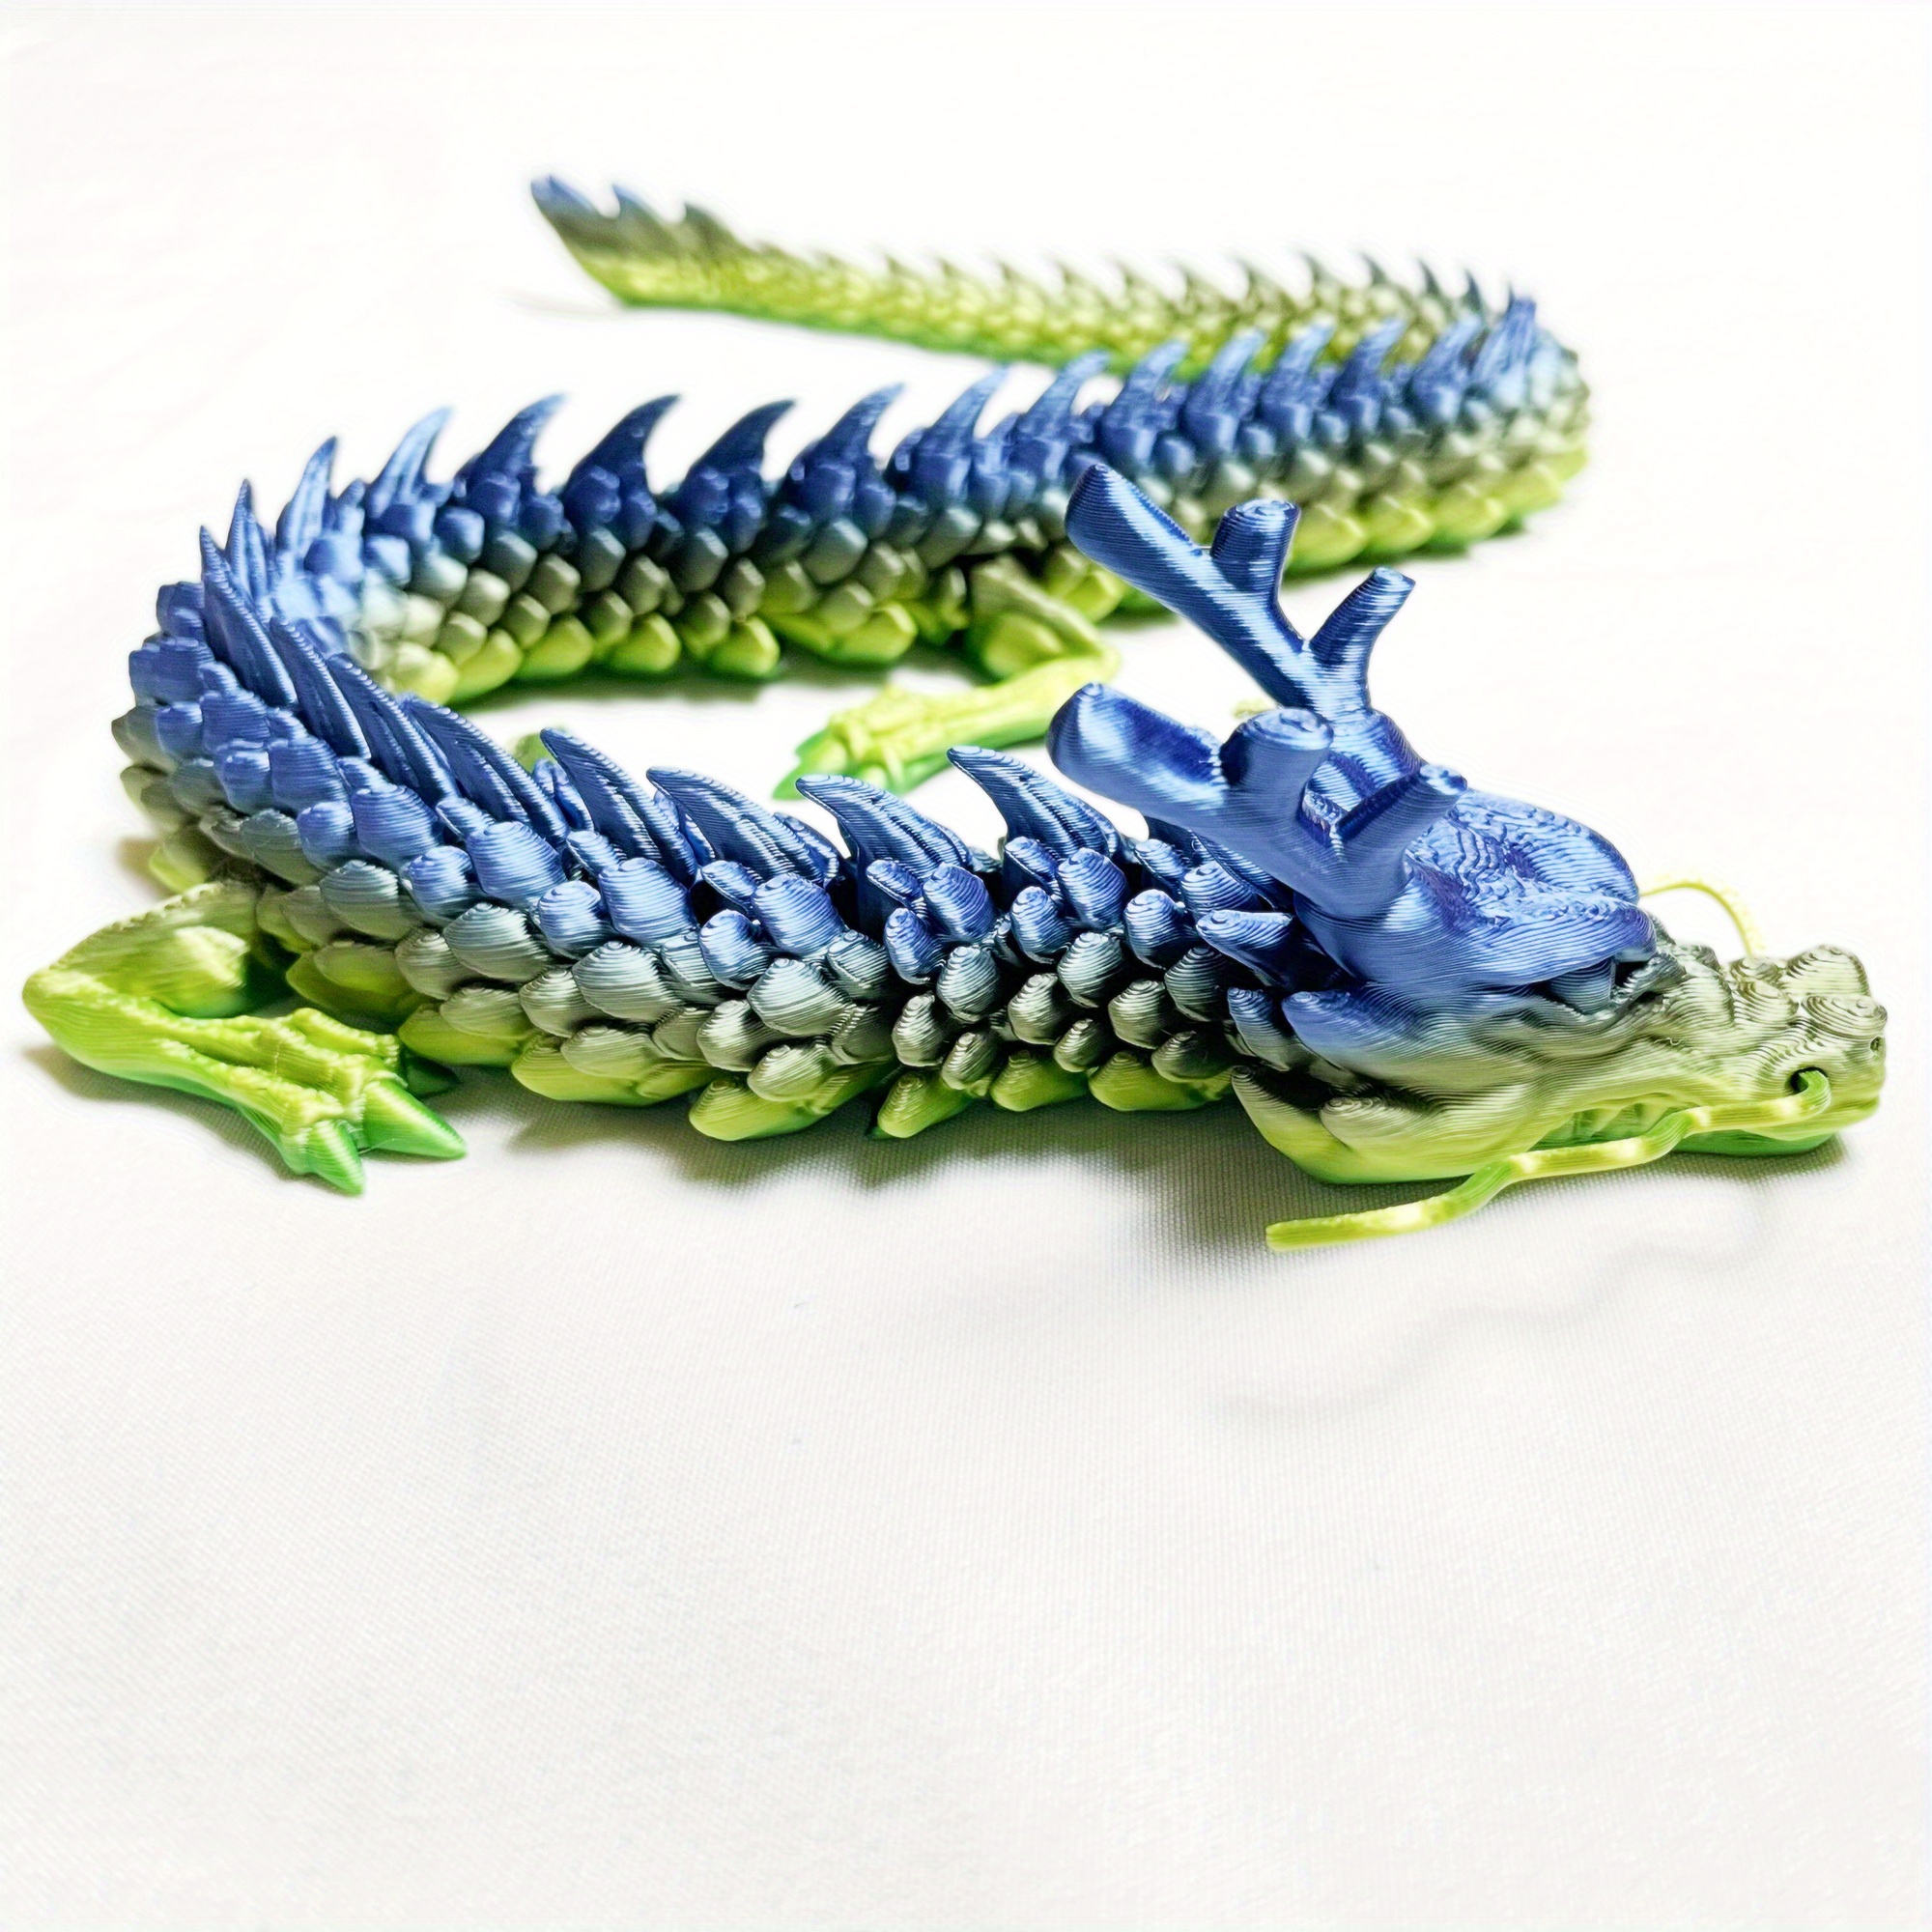 3D Printed Dragon Toys, Relief Anxiety Crystal Dragon Figure with Rotatable  Joints, 3D Printed Dragon Action Figures/ Articulated Dragon Gifts for